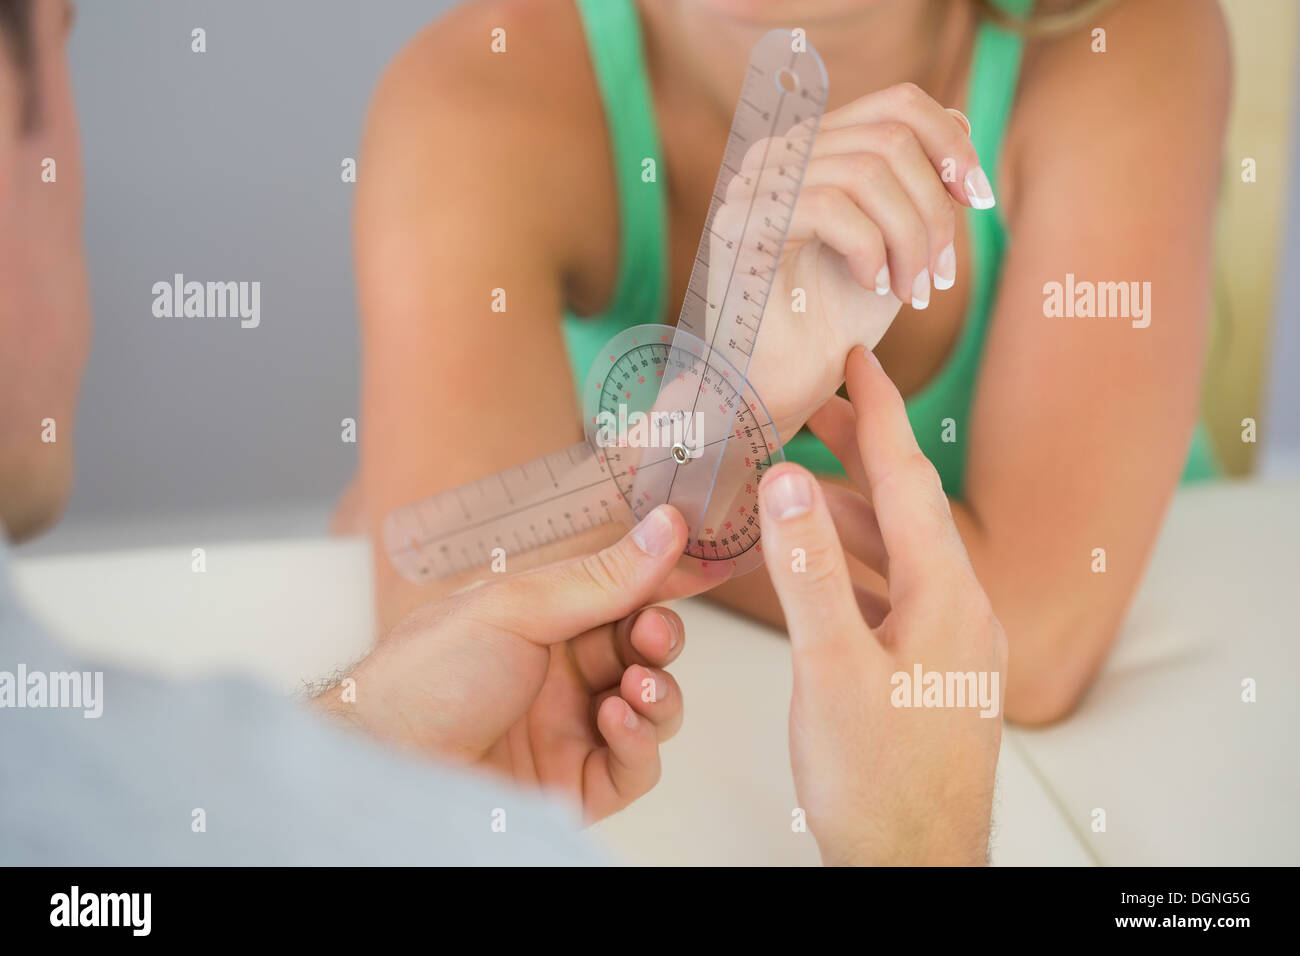 Physiotherapist examining patients wrist with goniometer Stock Photo